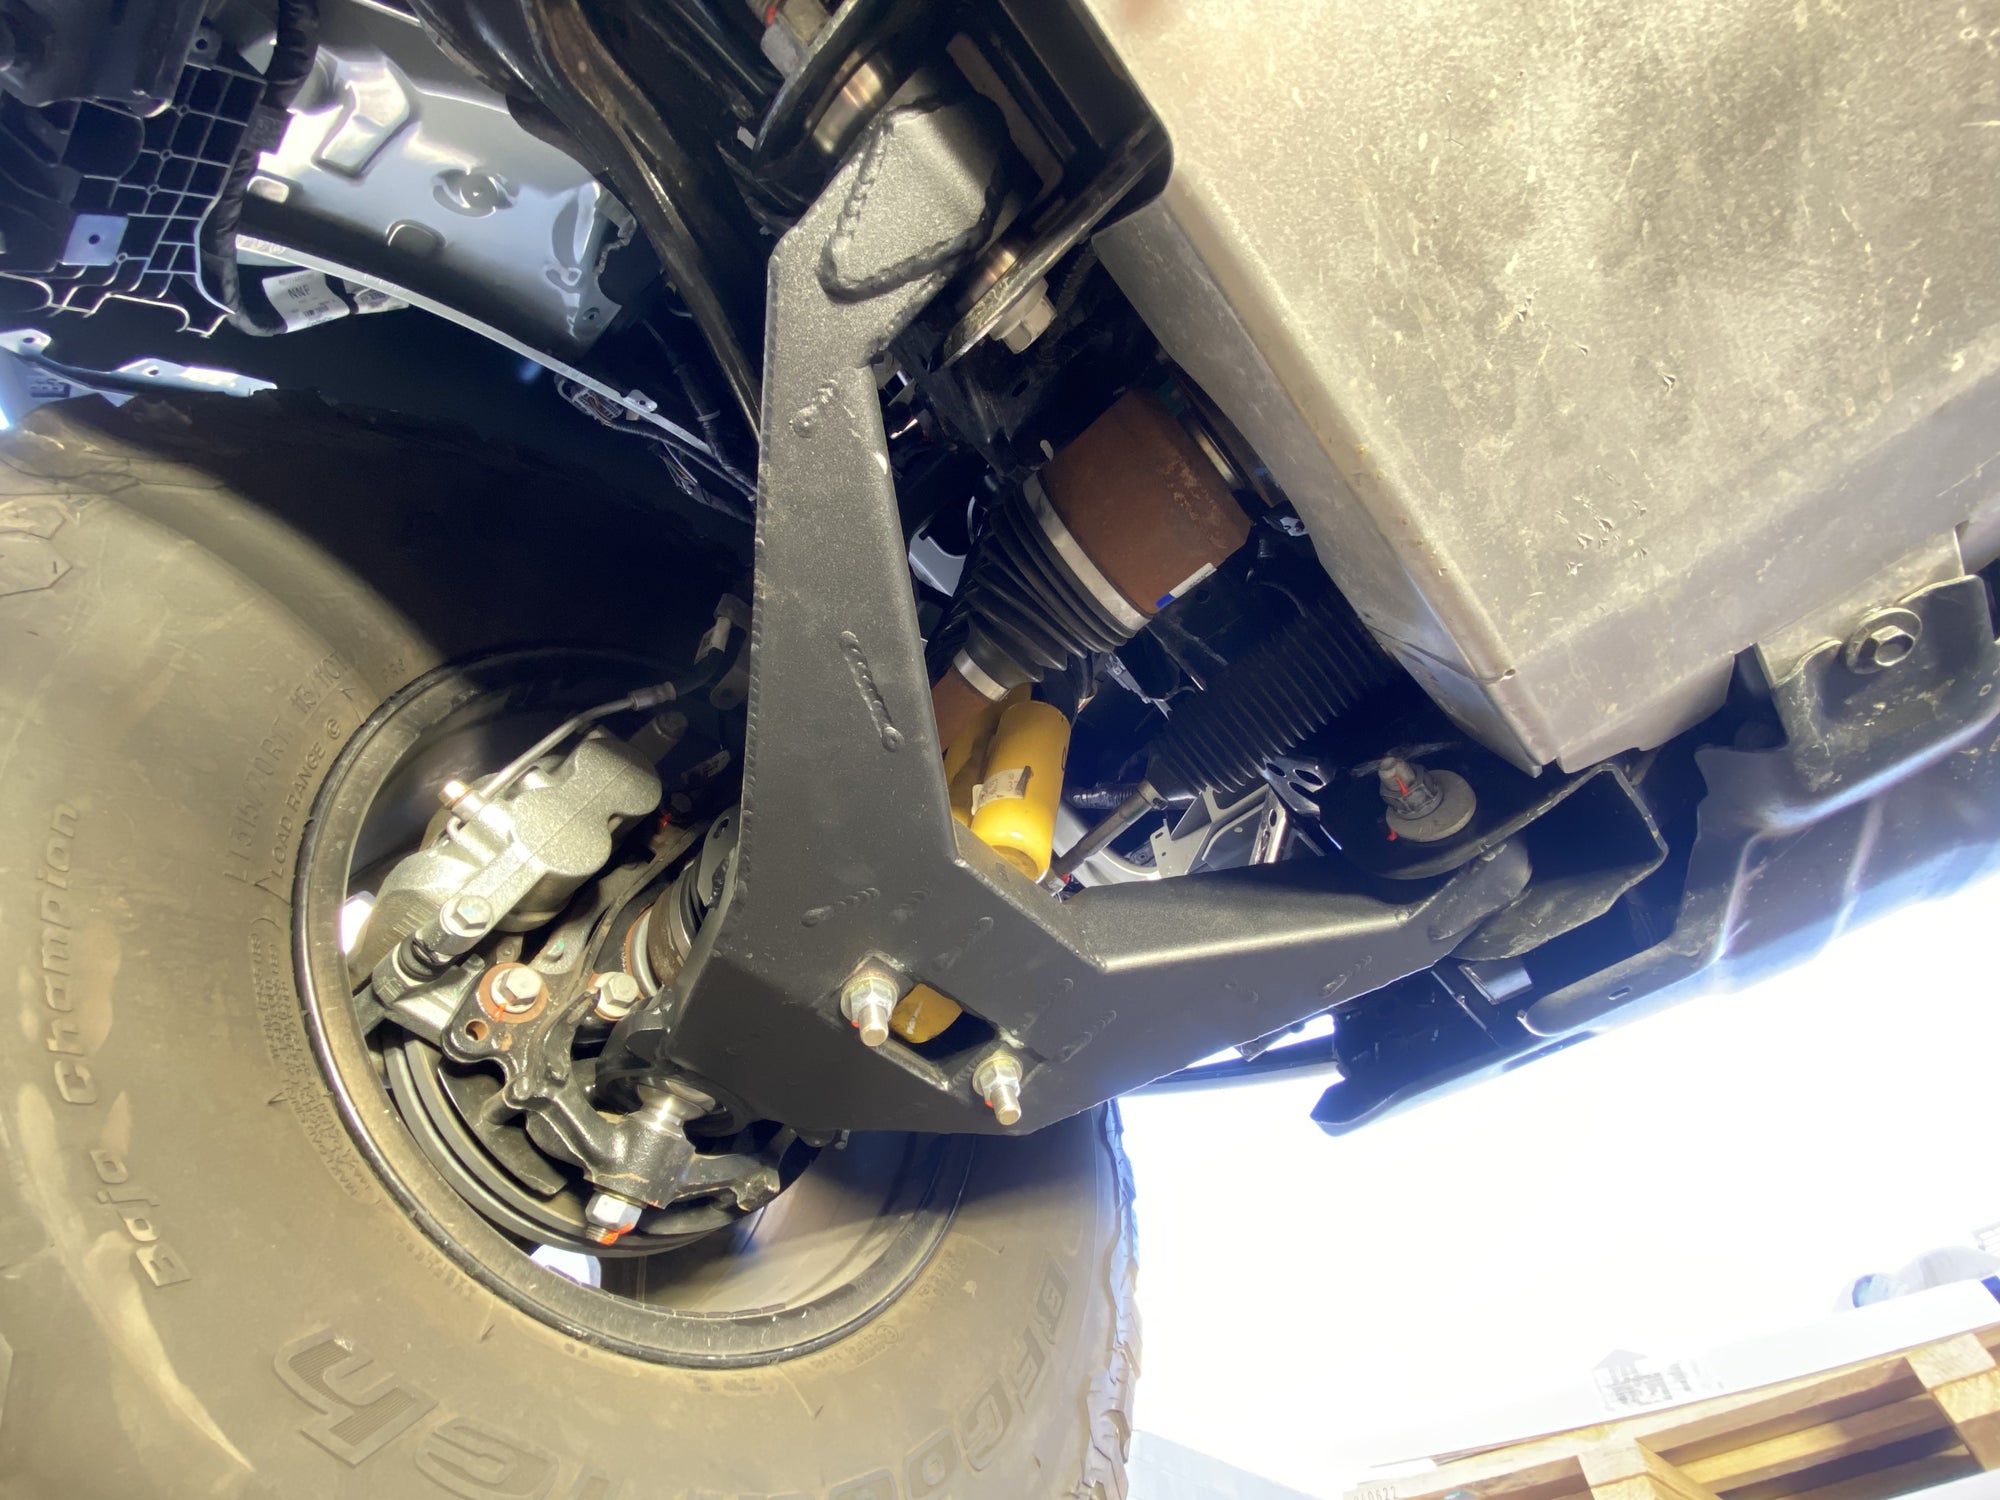 2021 - up Bronco Fabricated Lower Arm Kit With By-pass Shock Mount - Stock Length